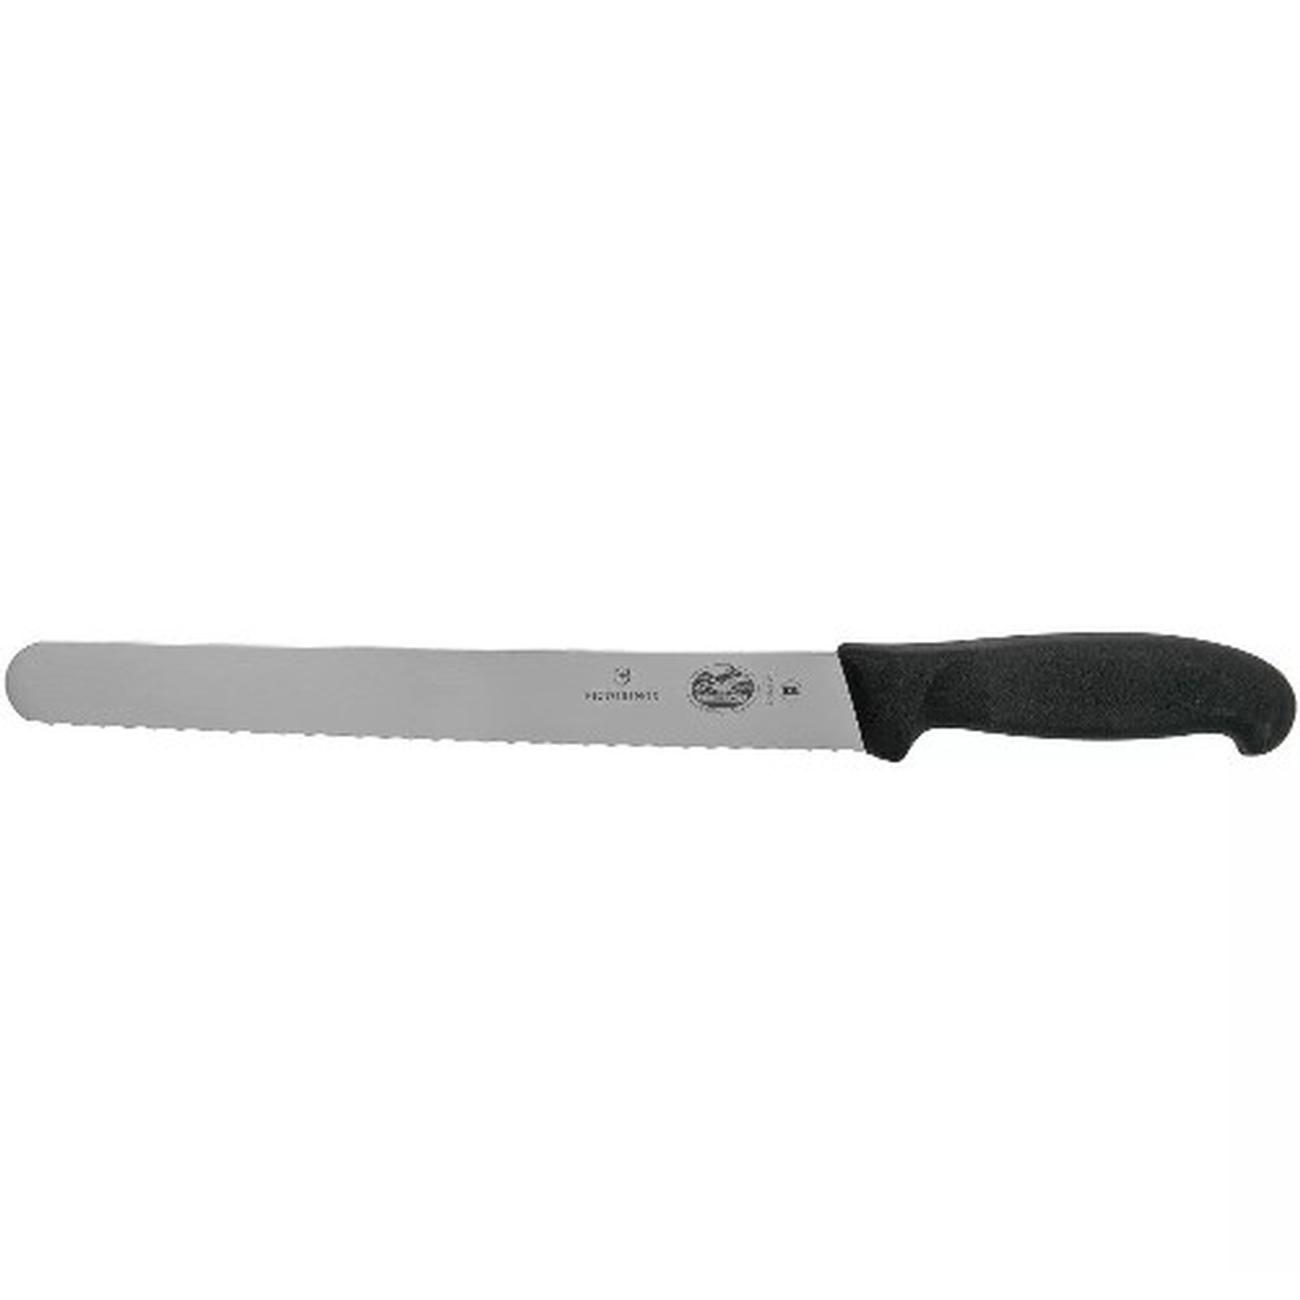 https://www.thekitchenwhisk.ie/contentfiles/productImages/Large/Victorinox-Fibrox-Slicing-Knife-Bread-Knife-Pastry-10inch-25cm.jpg